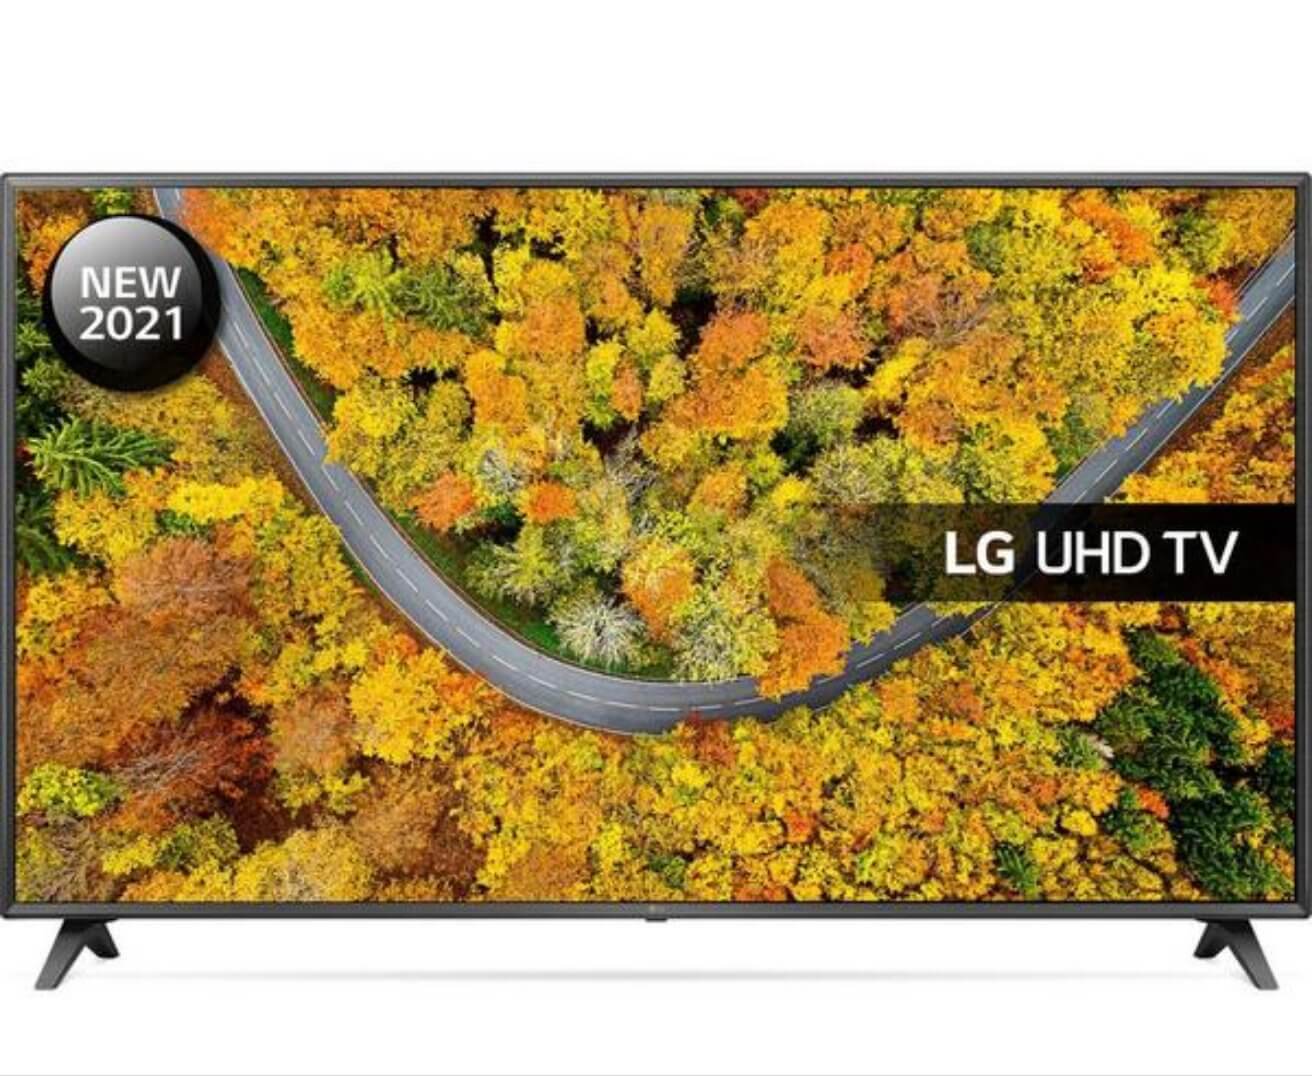 LG 43UP75006LF 43 inch 4K UHD HDR Smart LED TV (2021 Model) with Freeview Play, Prime Video, Netflix, Disney+ - SamaTechs